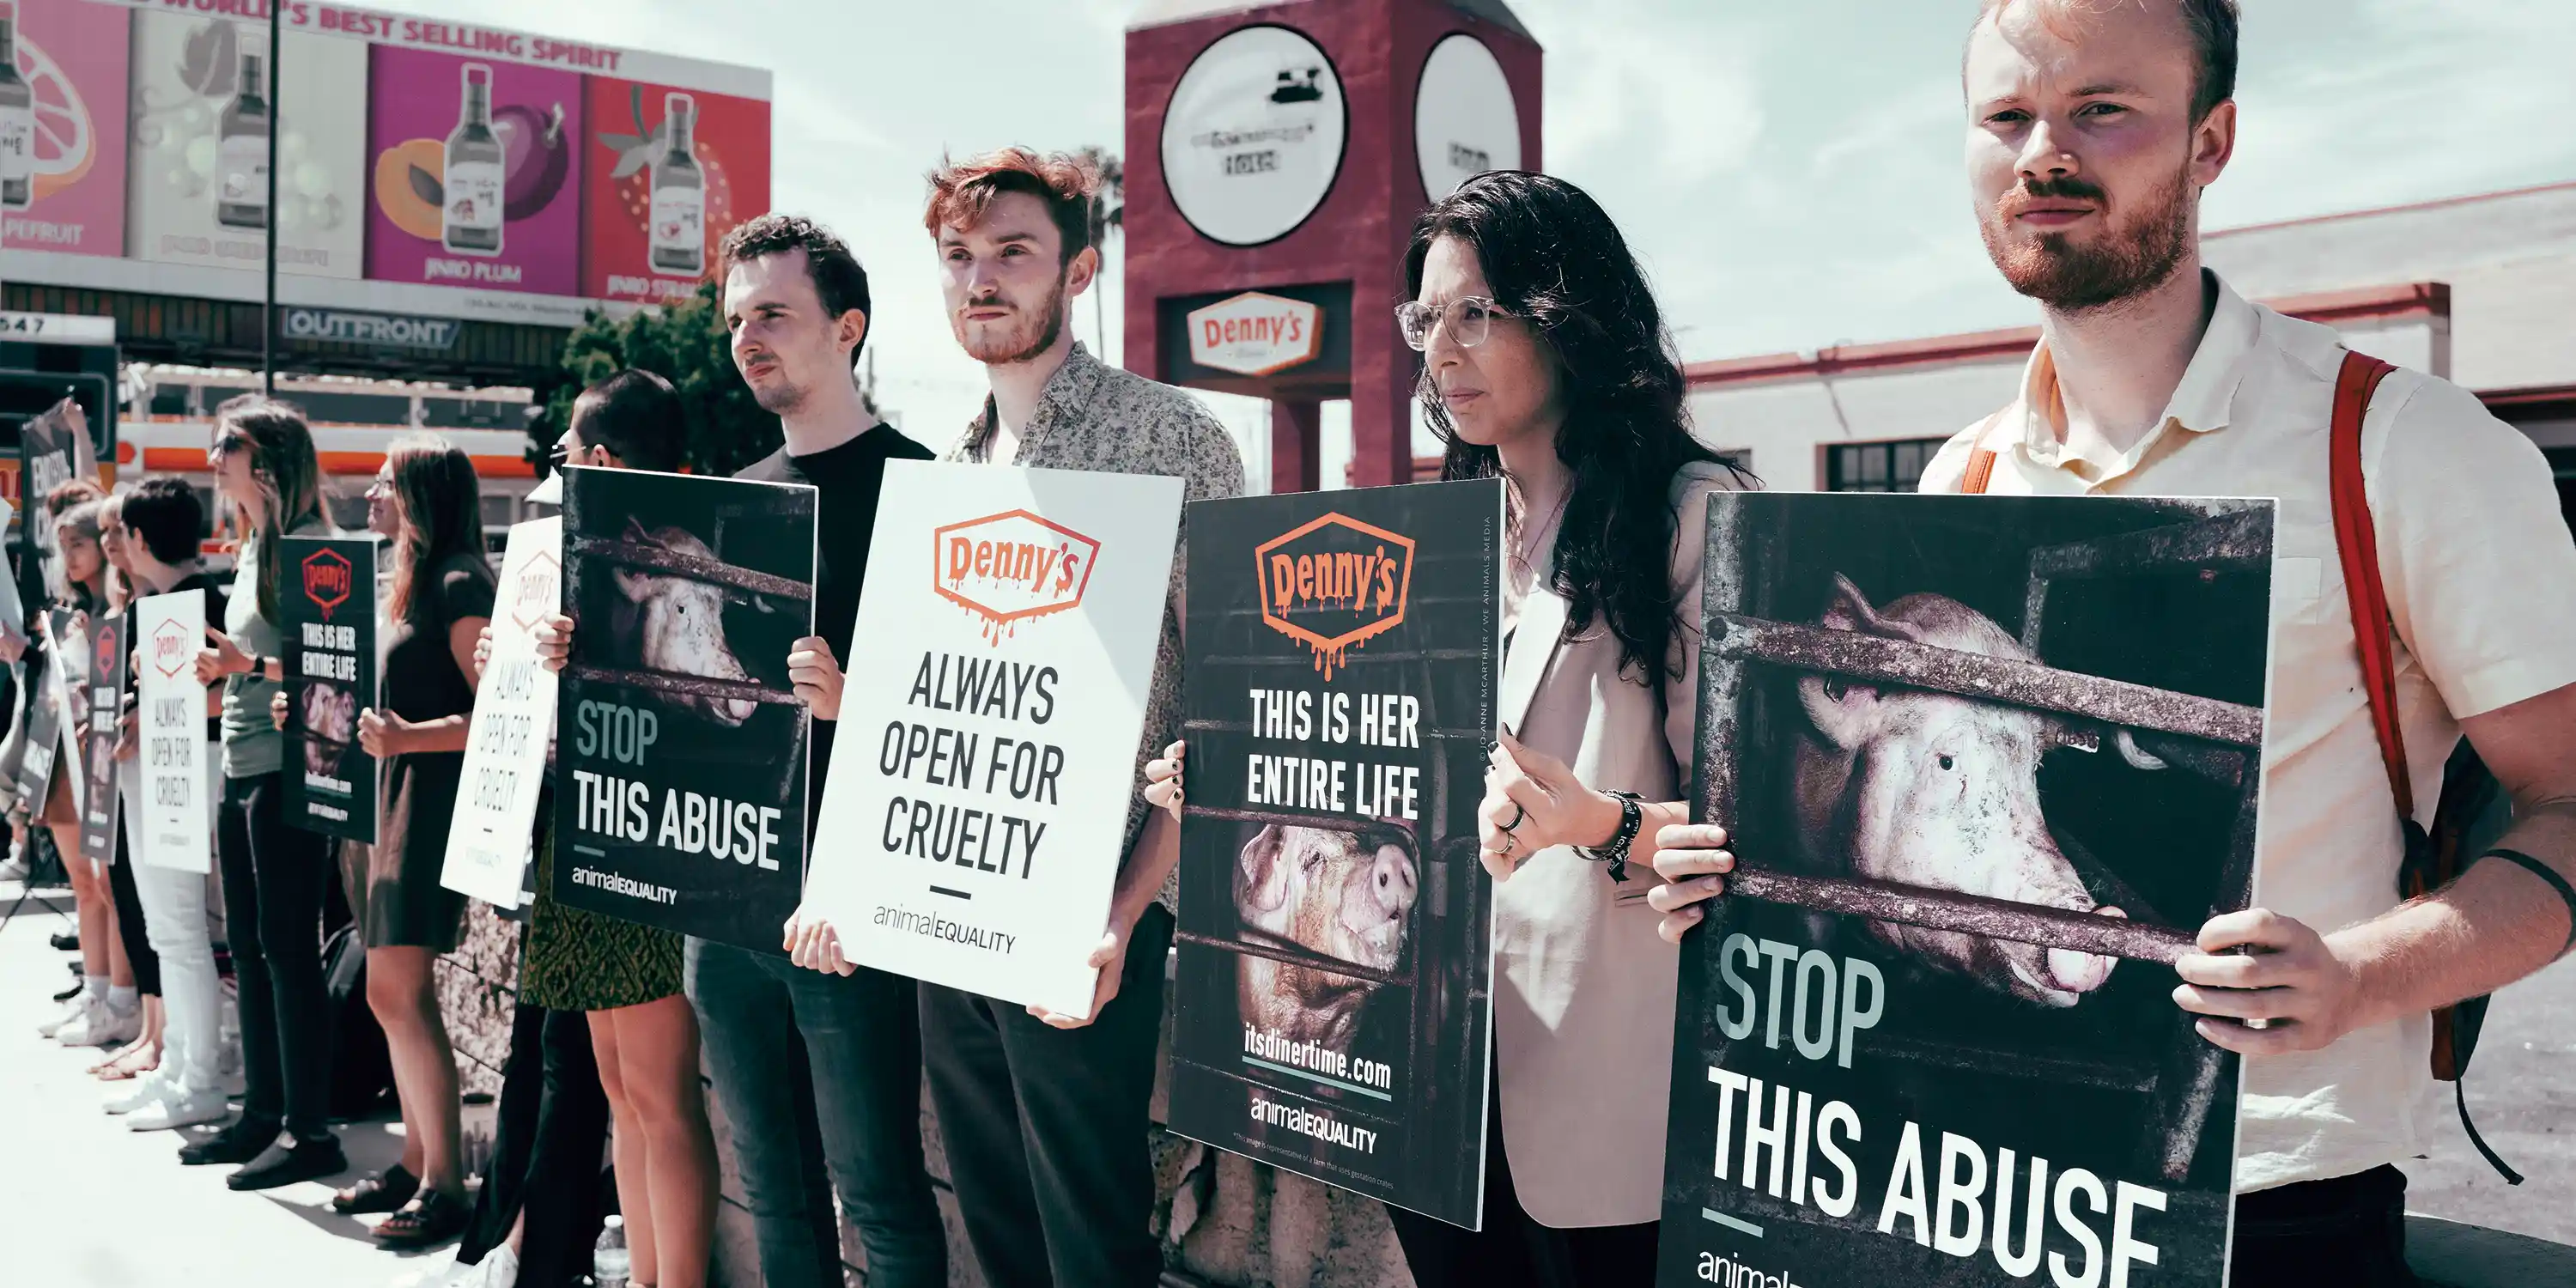 Animal Equality volunteers protesting in defense of animals